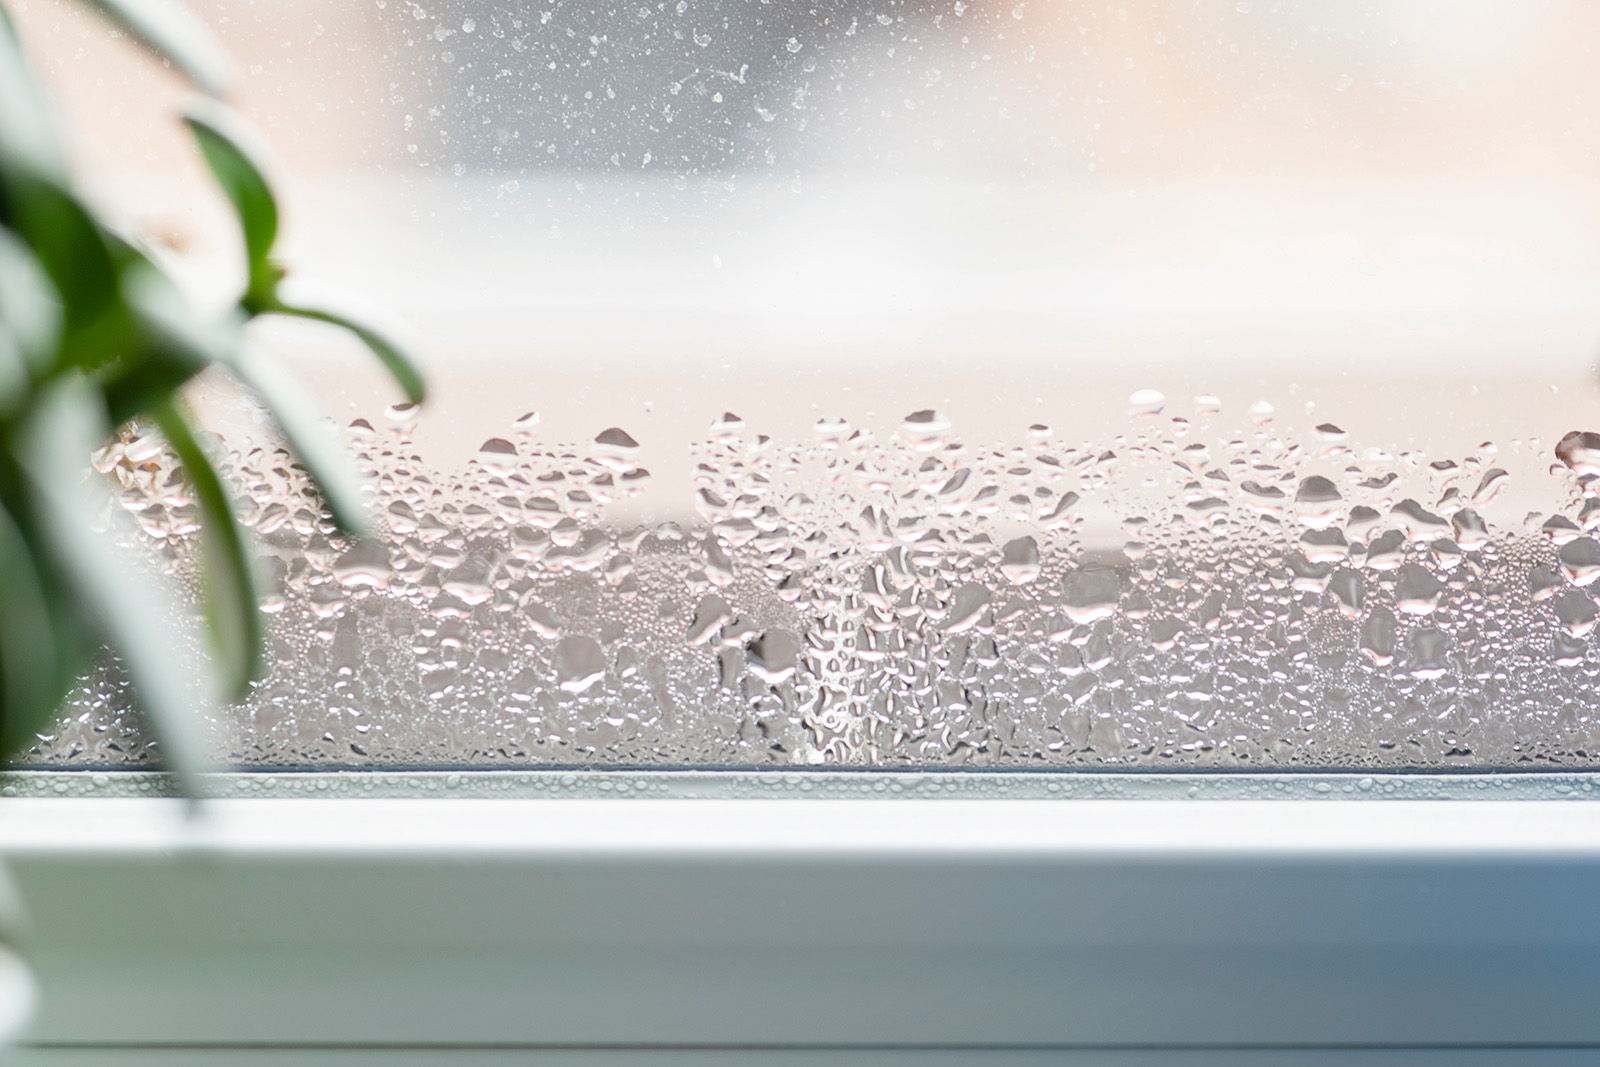 Humidity levels are clear from condensation on indoor window.